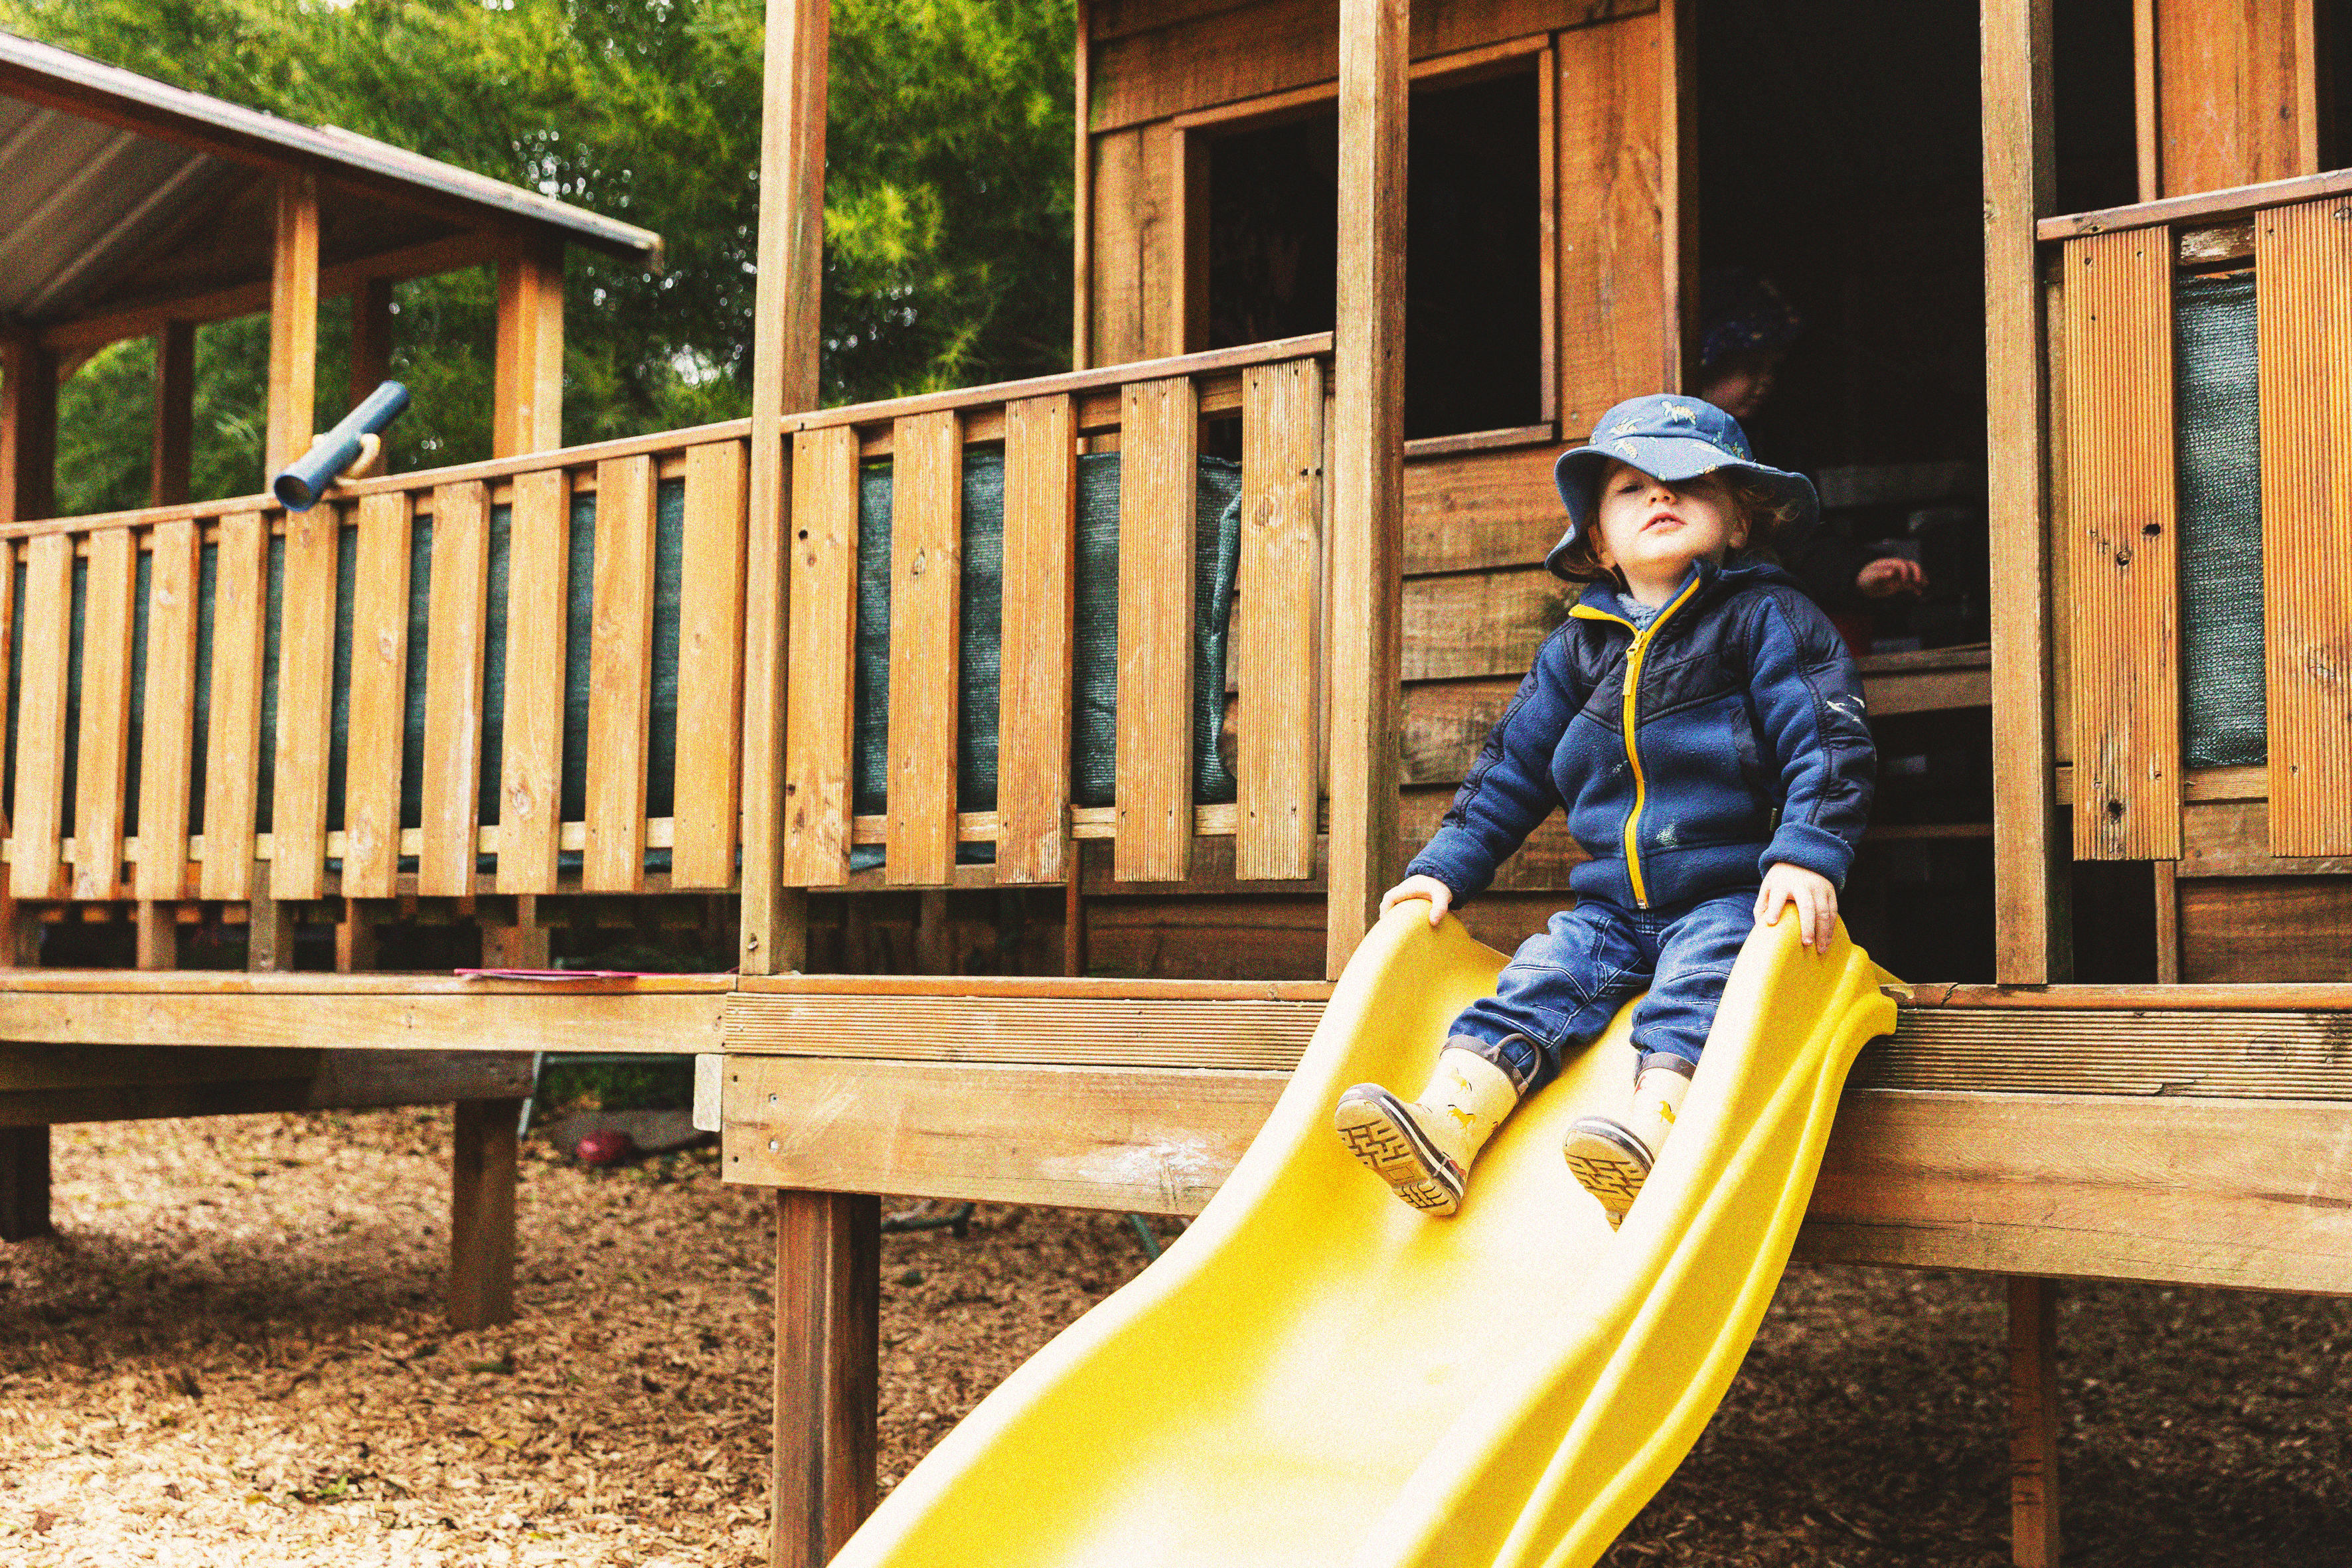 Young child going down a yellow slide